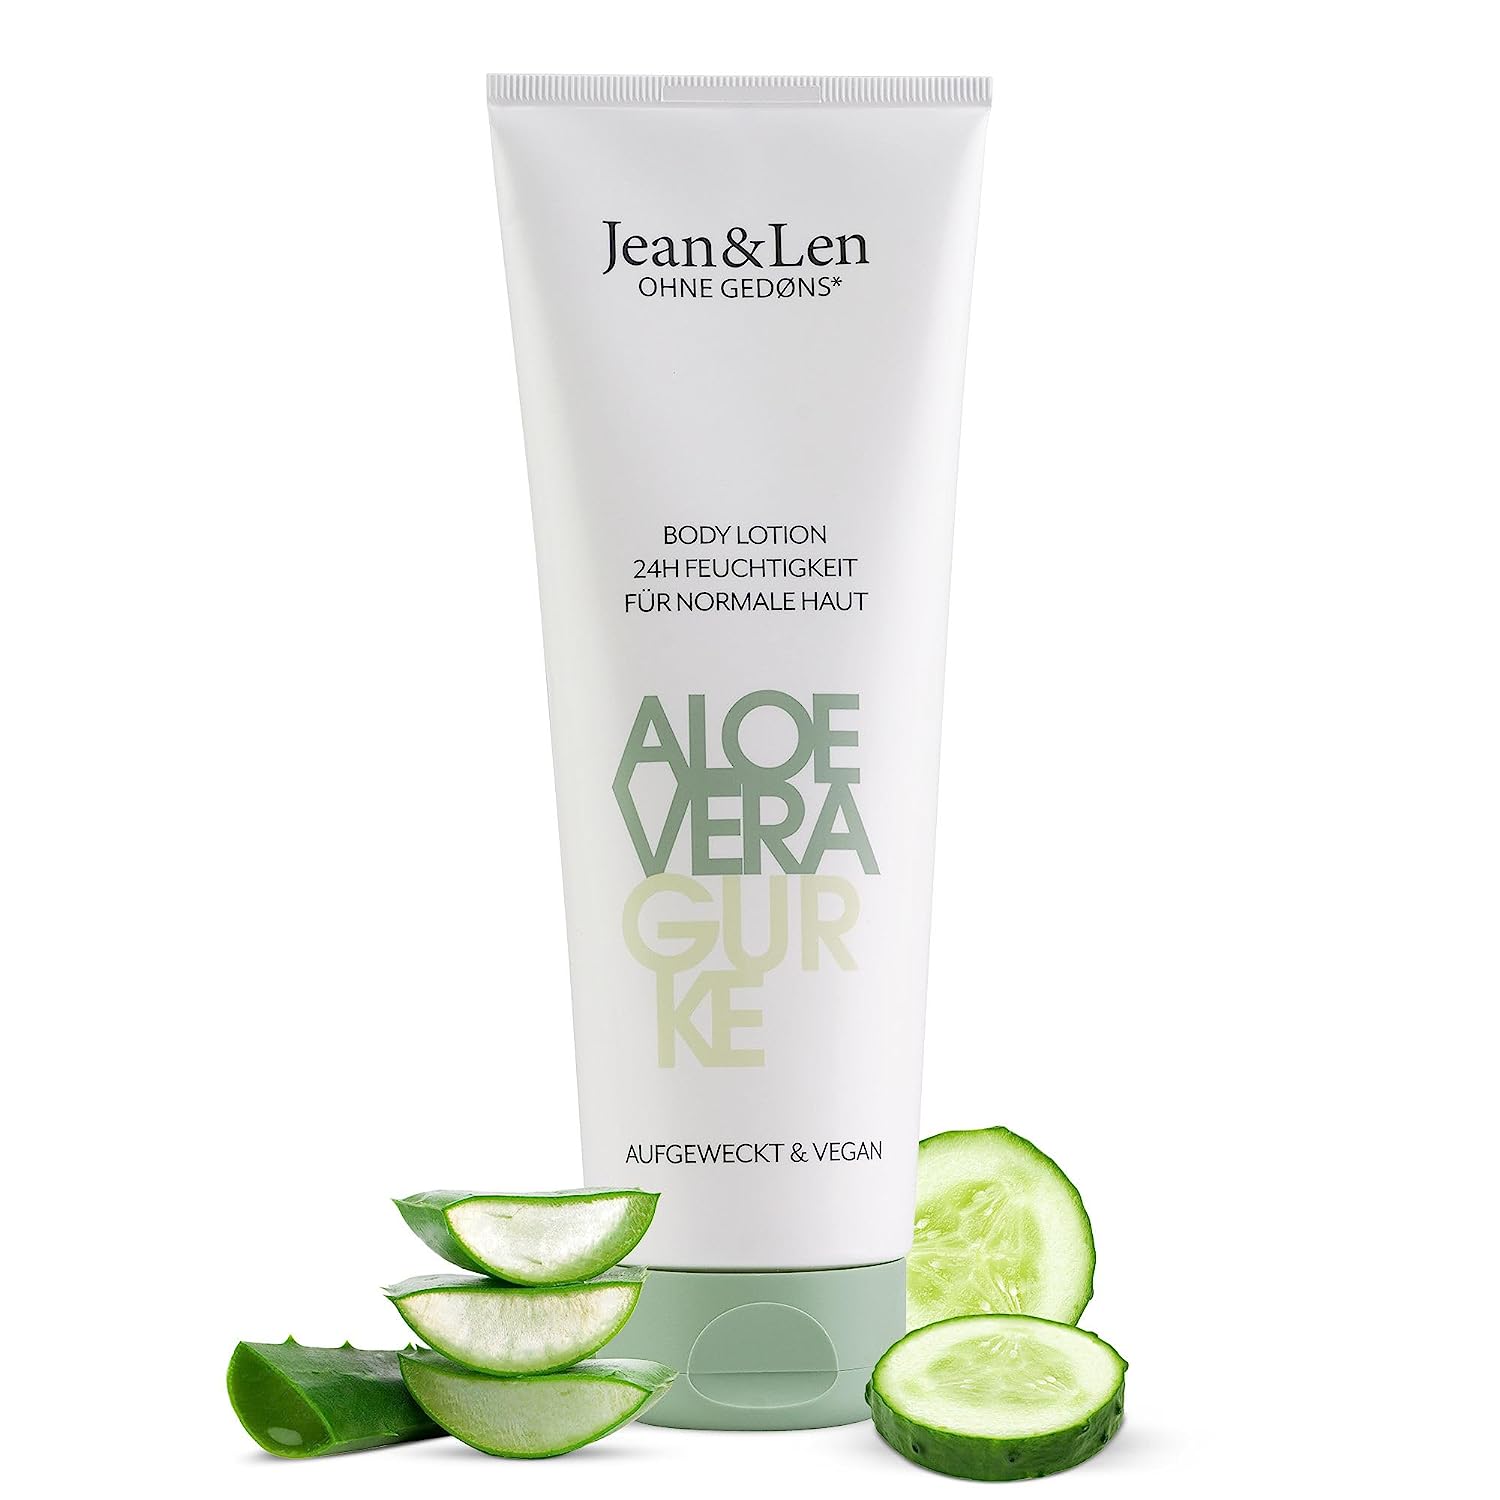 Jean & Len Body Lotion Aloe Vera & Cucumber for Normal Skin, Creamy Light Texture, Moisturises the Skin for 24 Hours, Body Lotion, Paraben & Silicone, Vegan, 250 ml